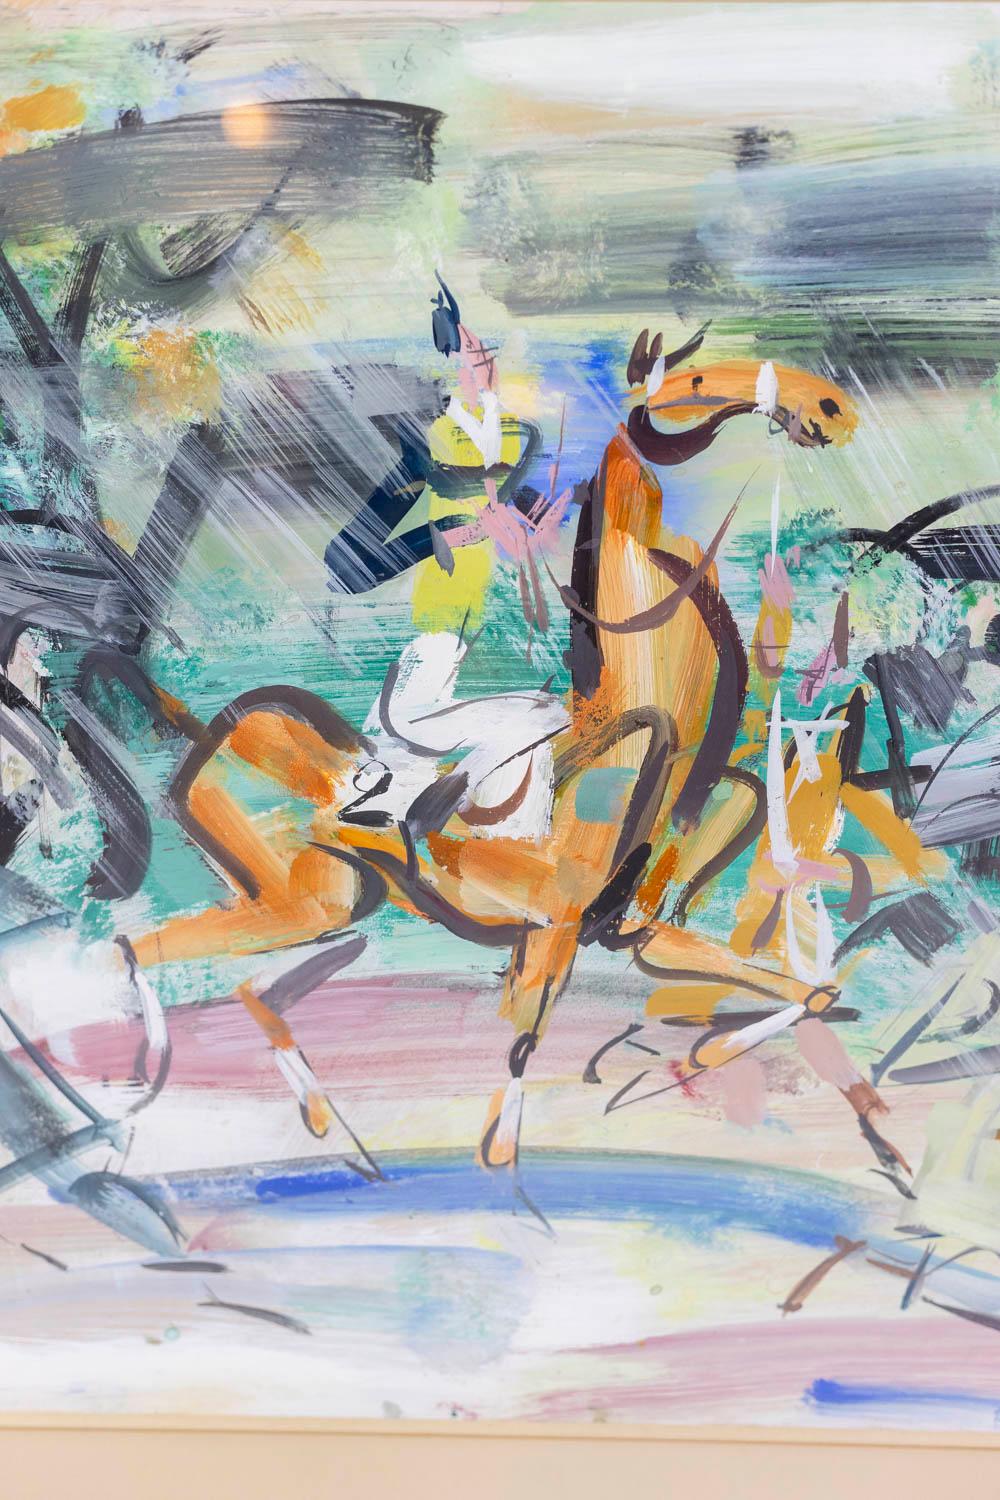 Gen Paul, signed.

Gouache titled “Le champs de course” representing a rider on a racetrack, framed under glass. Frame strip in black and gold. Signed and dated on the reverse, with a sketch.

French work realized in the 1950s.

Dimensions : H 69 x